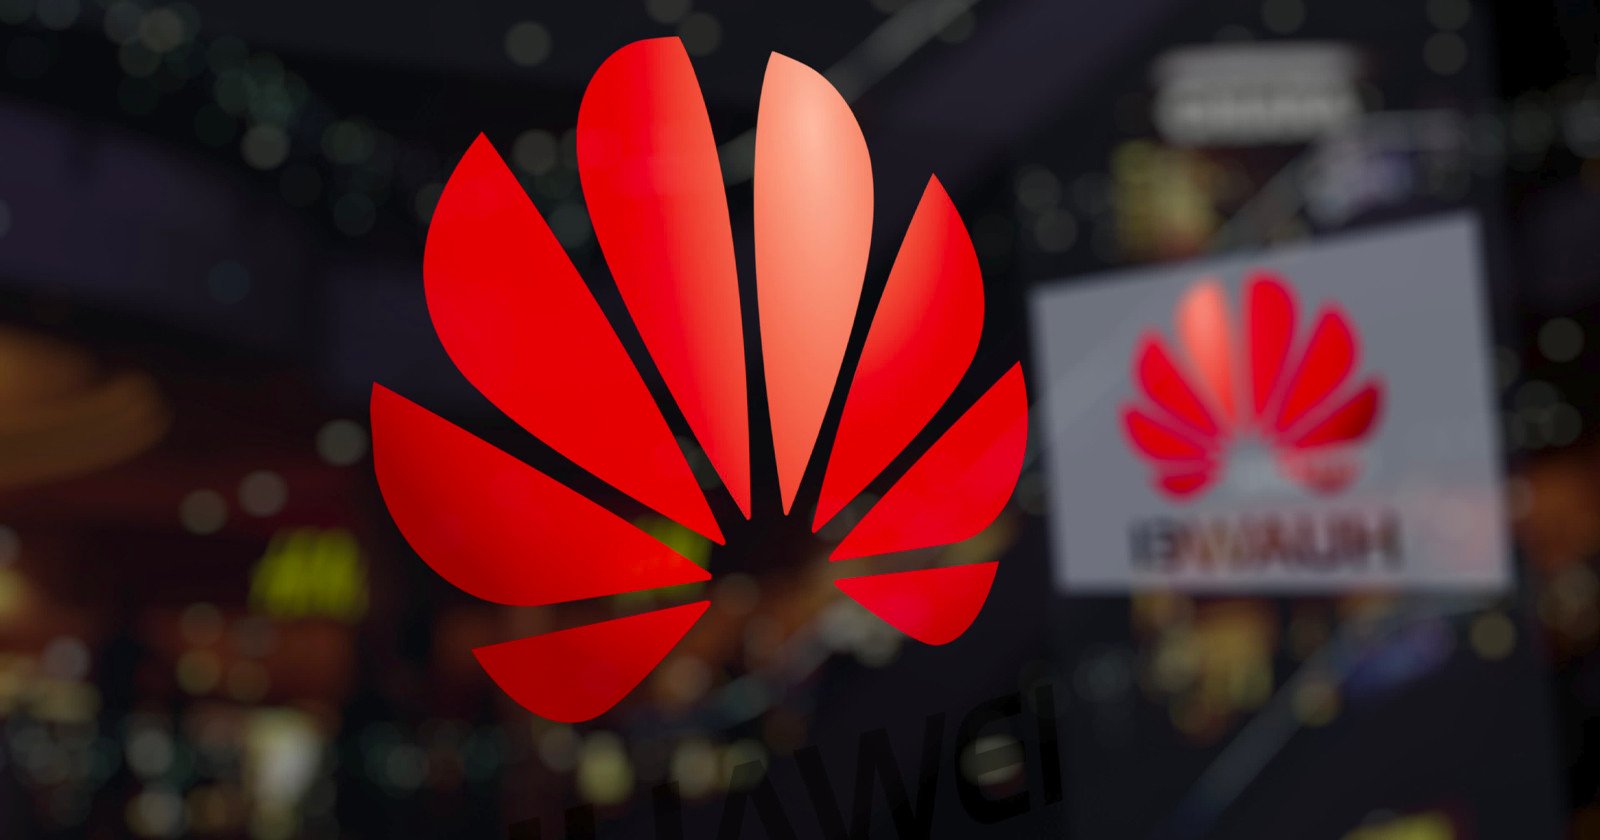 U.S. Charges Two Suspected Chinese Spies in Plot to Disrupt Huawei Probe